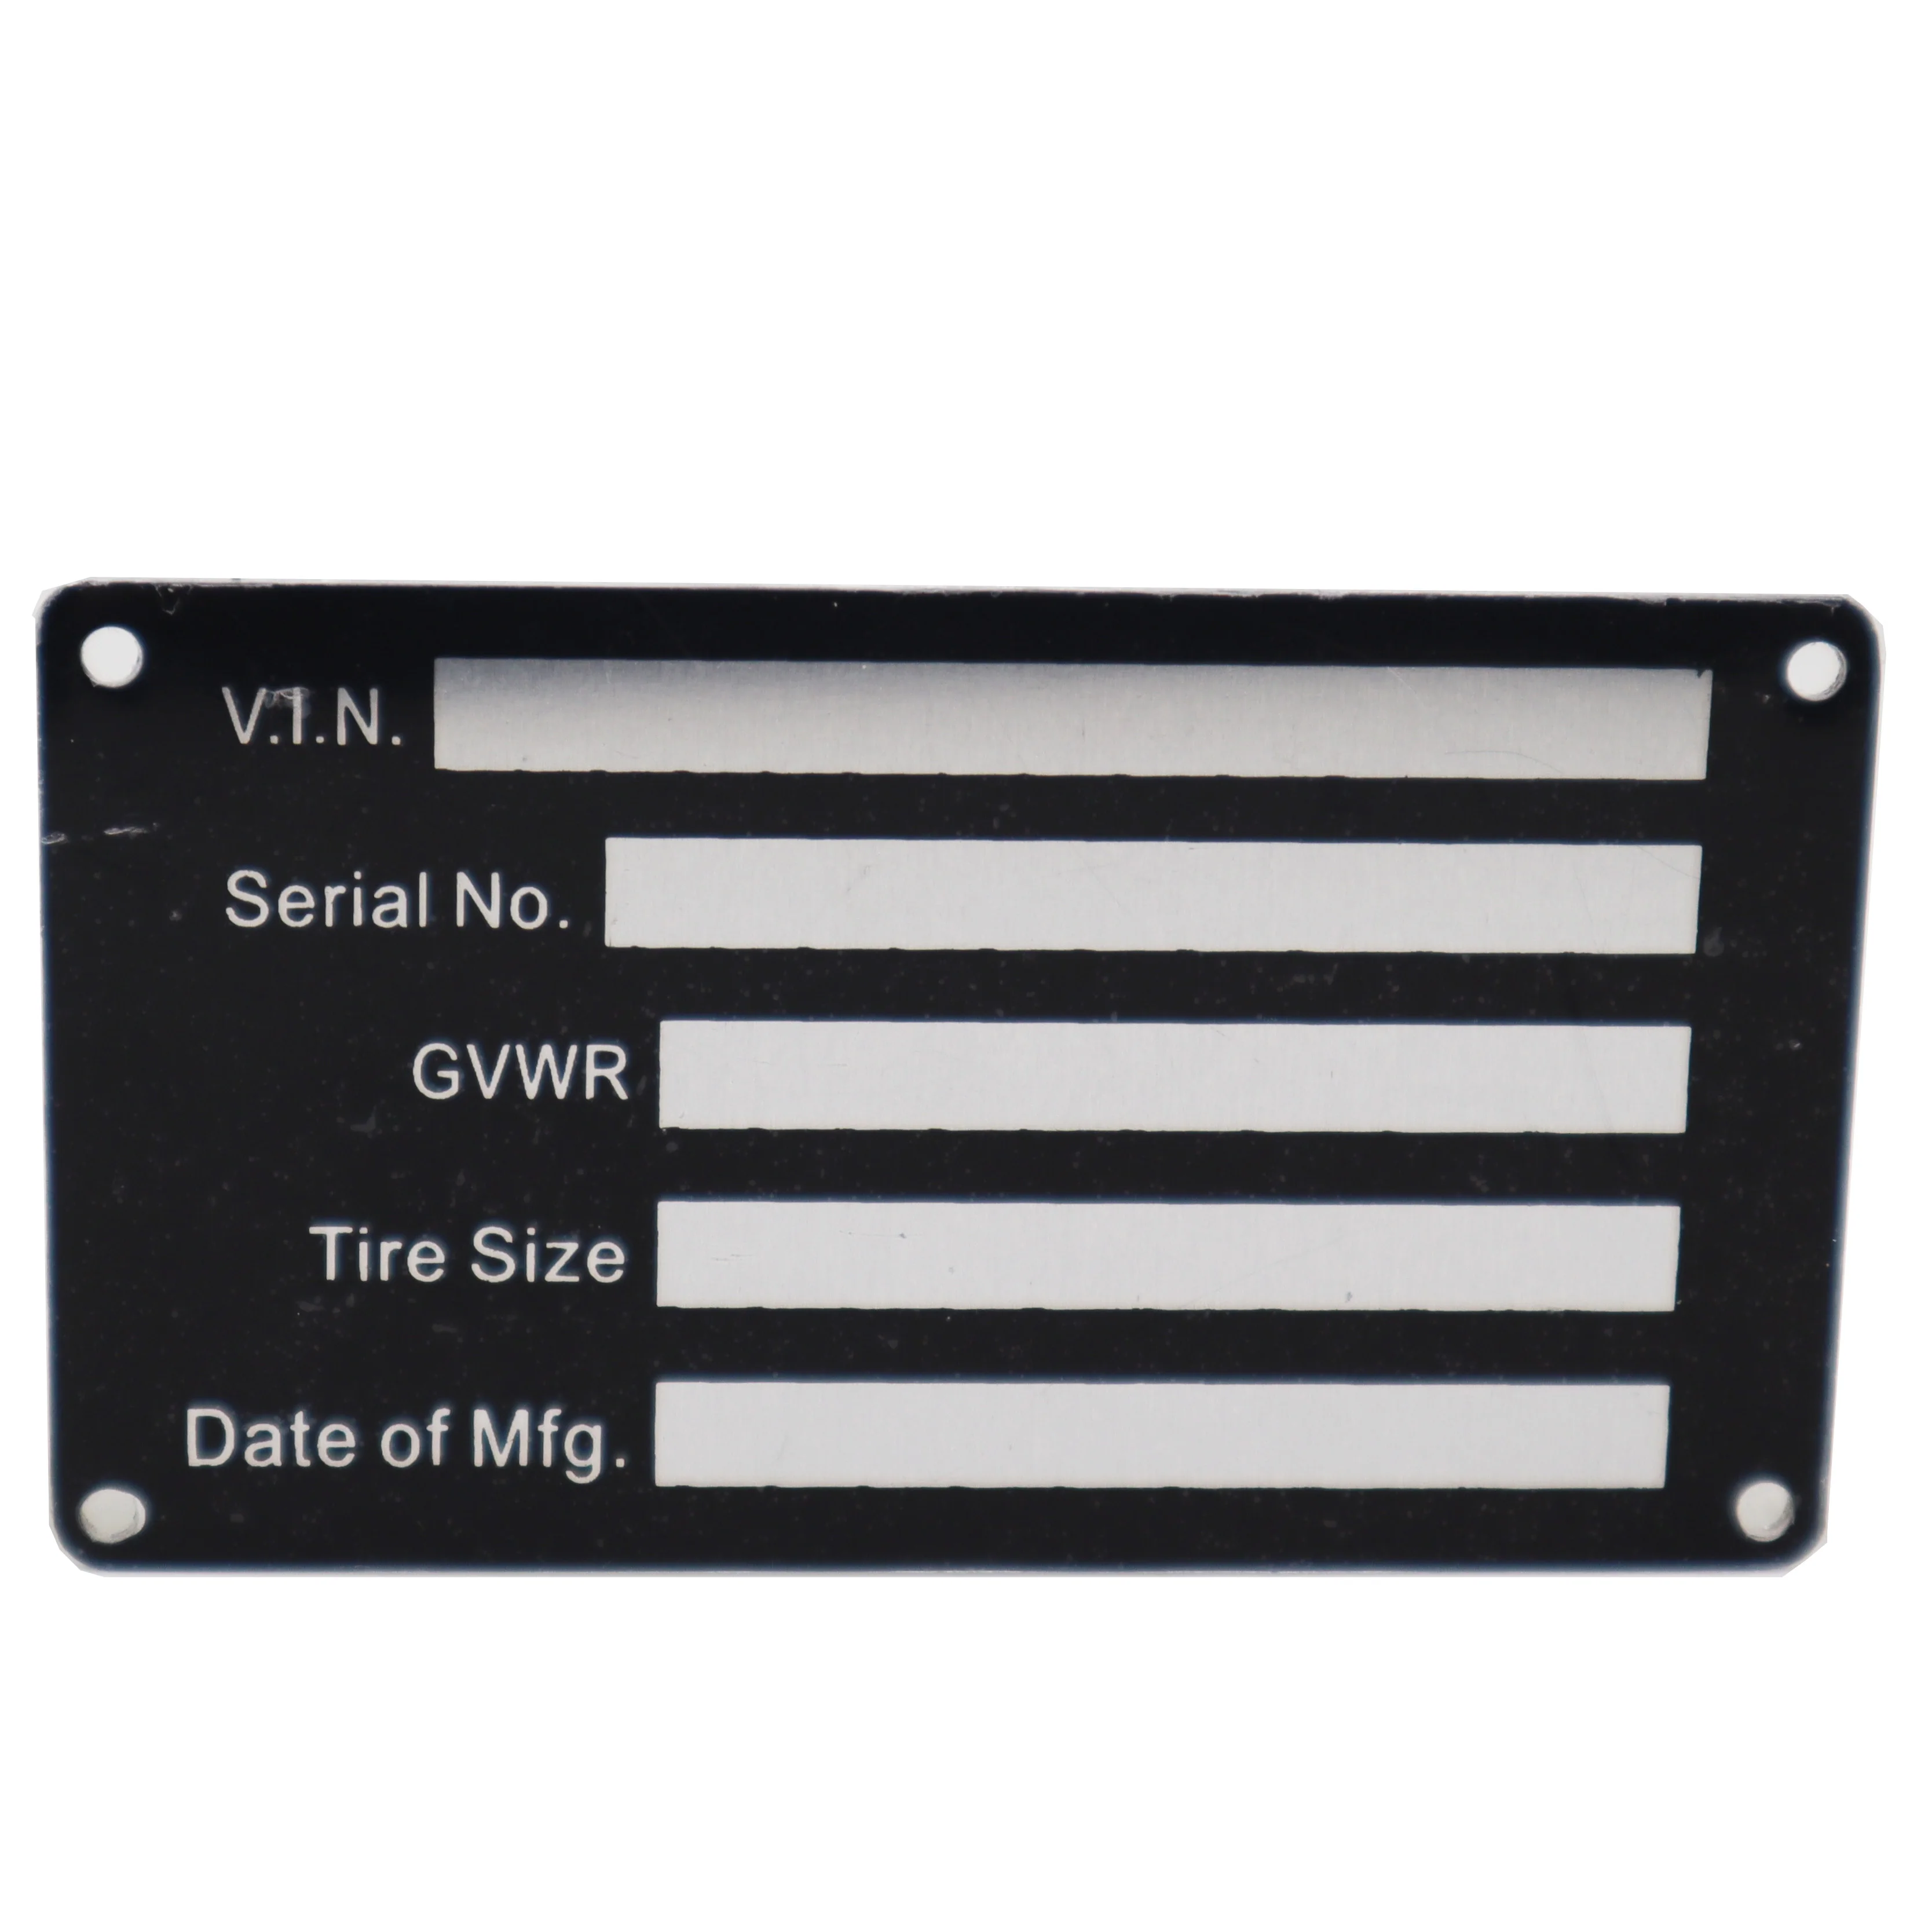 Blank Med Trailer Truck Equipment VIN Plate Frame Serial No Model # ID Tag GVWR Vin Plate for Trailers, Trucks and Equipment